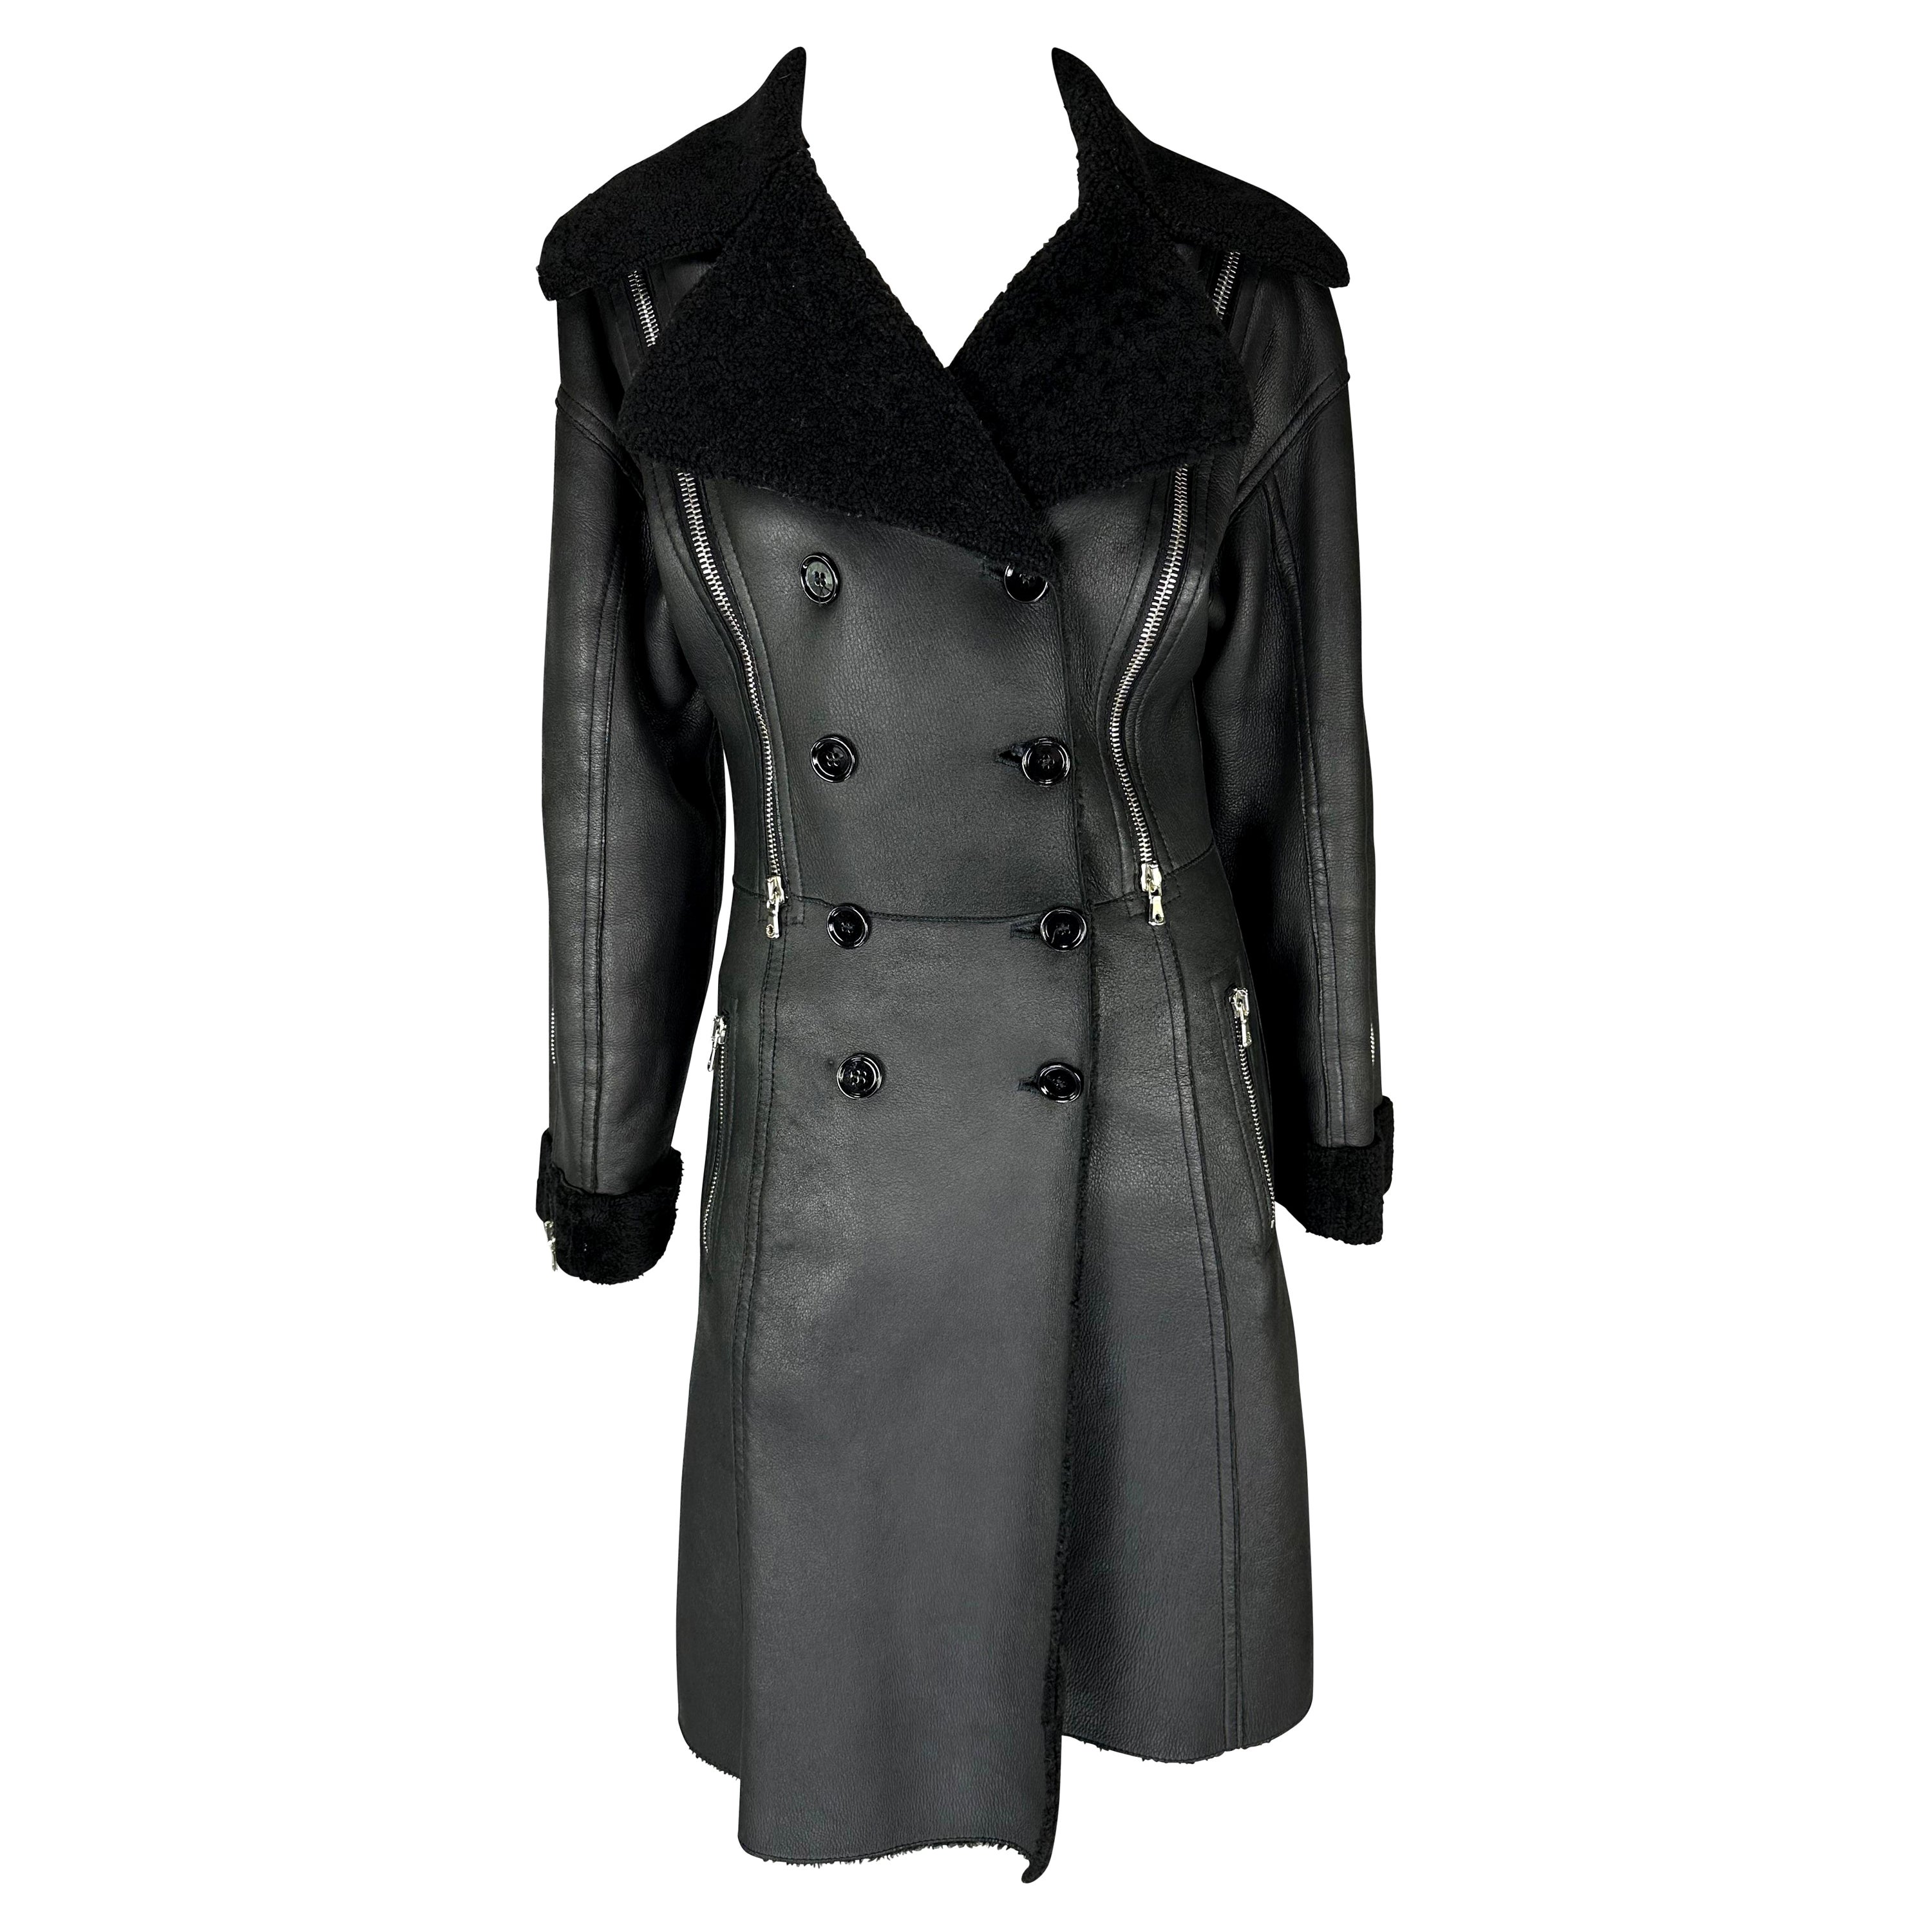 F/W 2003 Dolce & Gabbana Shearling Lined Black Leather Adjustable Zip Coat For Sale